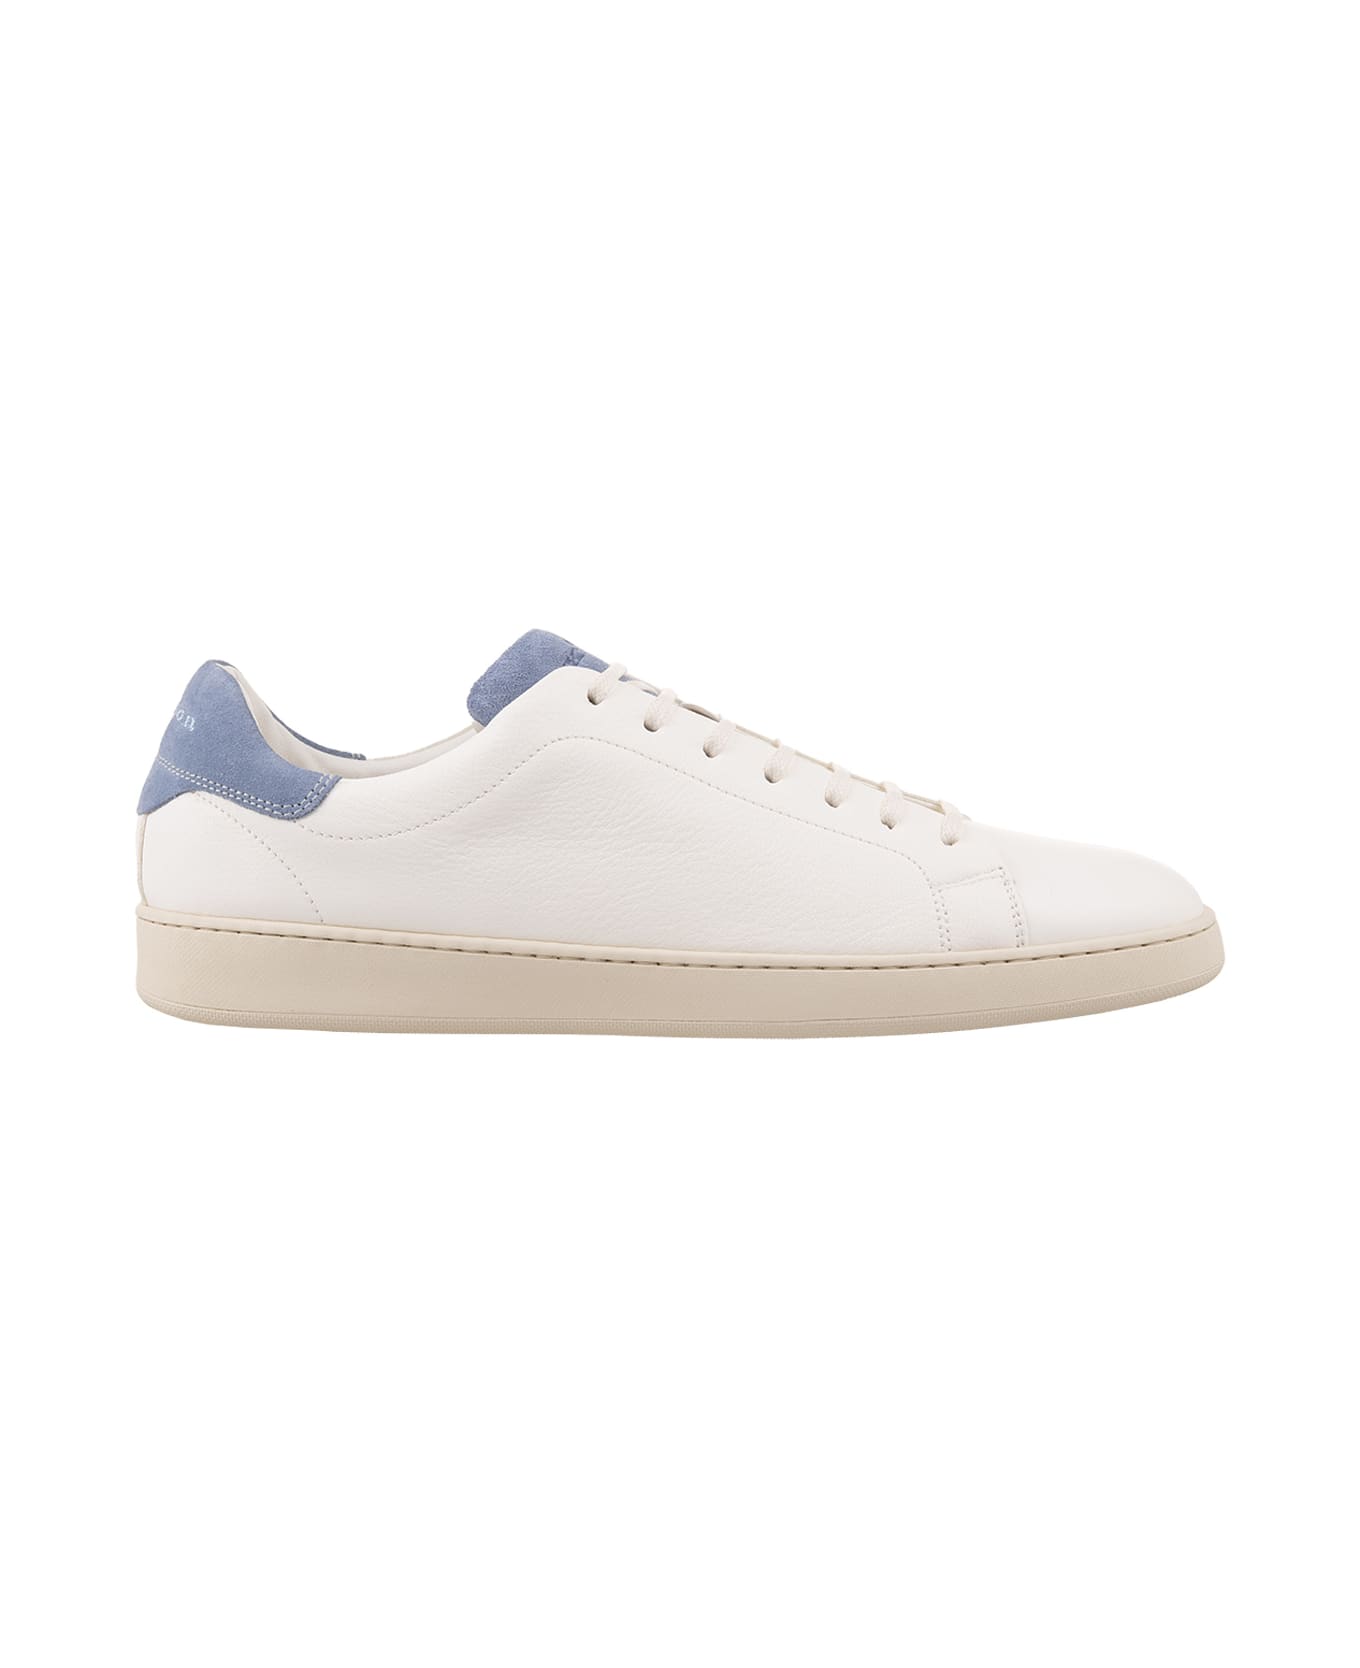 Kiton White Leather Sneakers With Light Blue Details - Blue スニーカー